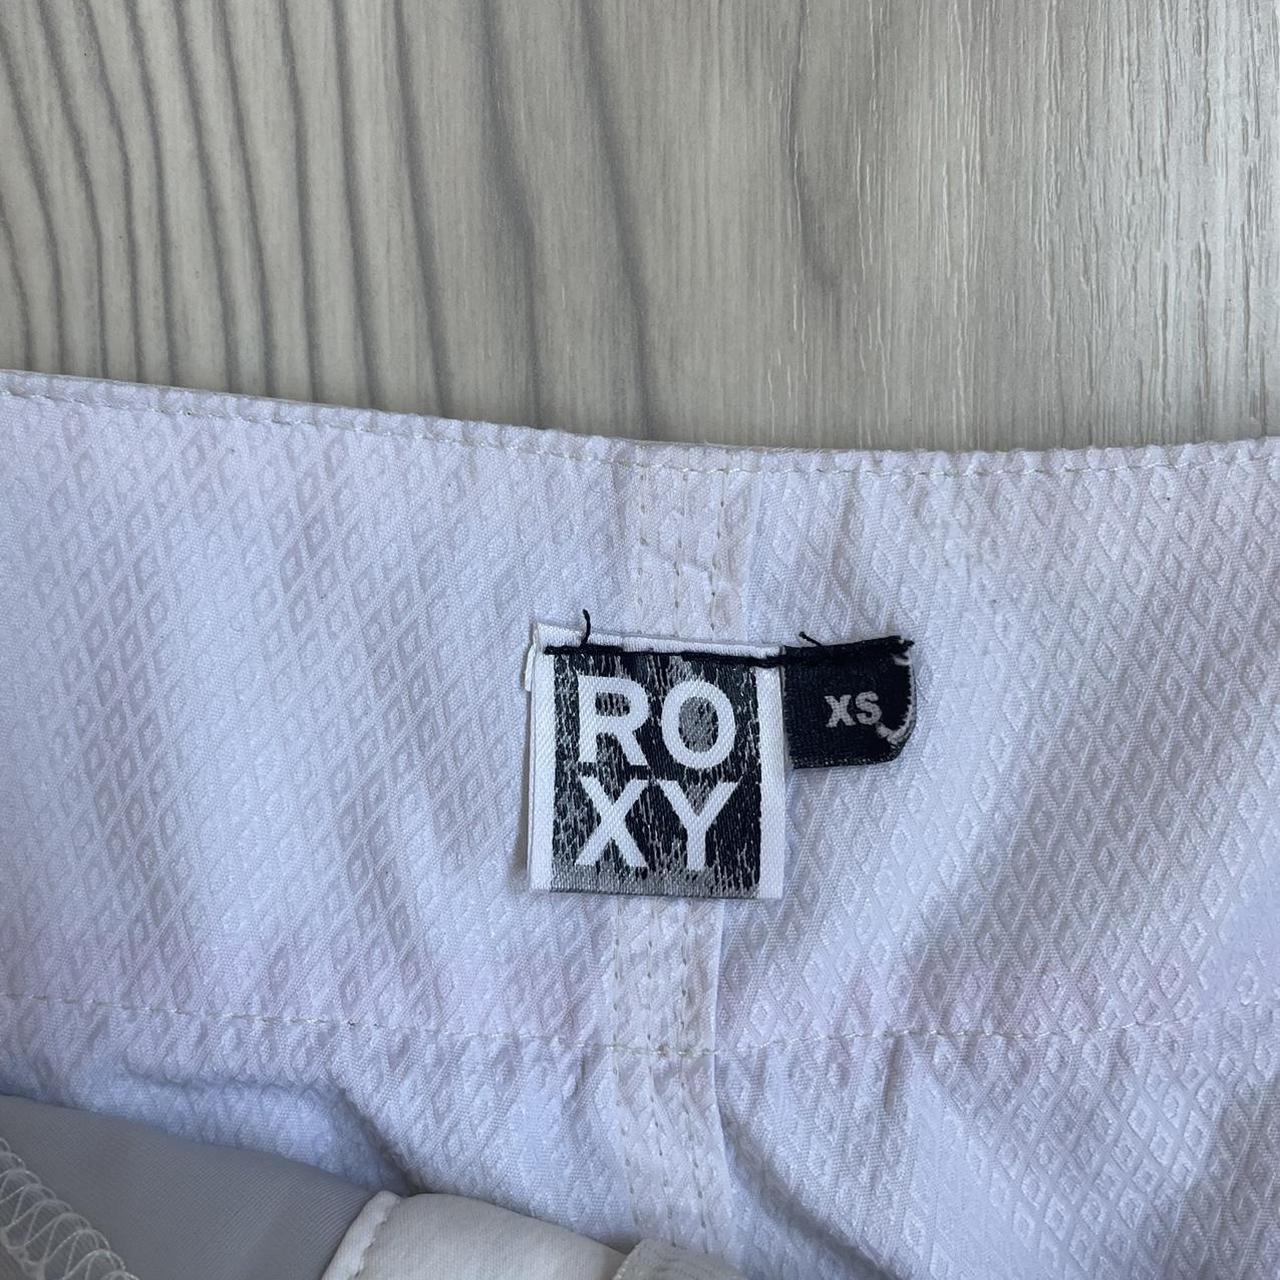 Product Image 2 - insane y2k roxy shorts
perfect condition
xs